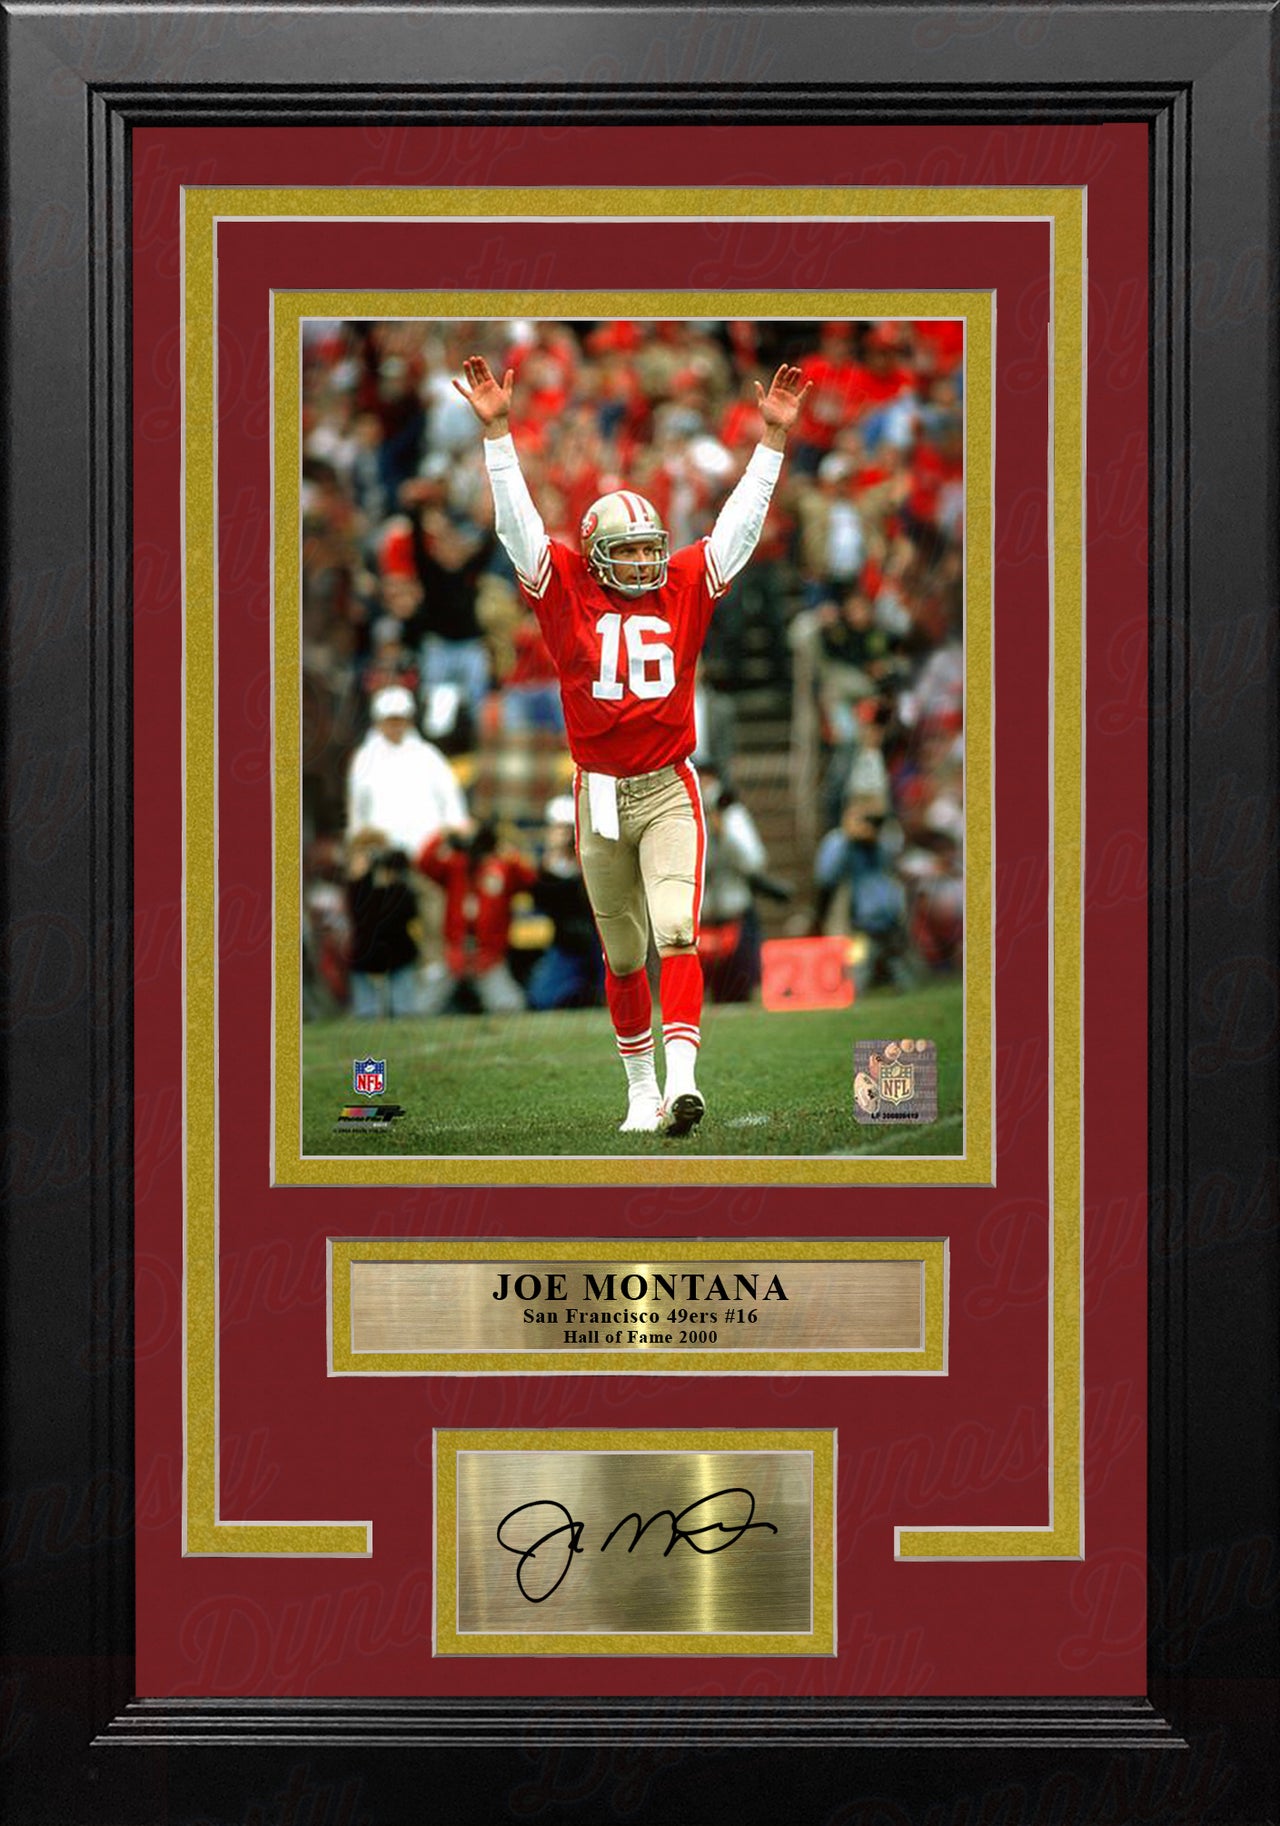 Joe Montana Celebration San Francisco 49ers 8" x 10" Framed and Matted Photo with Engraved Autograph